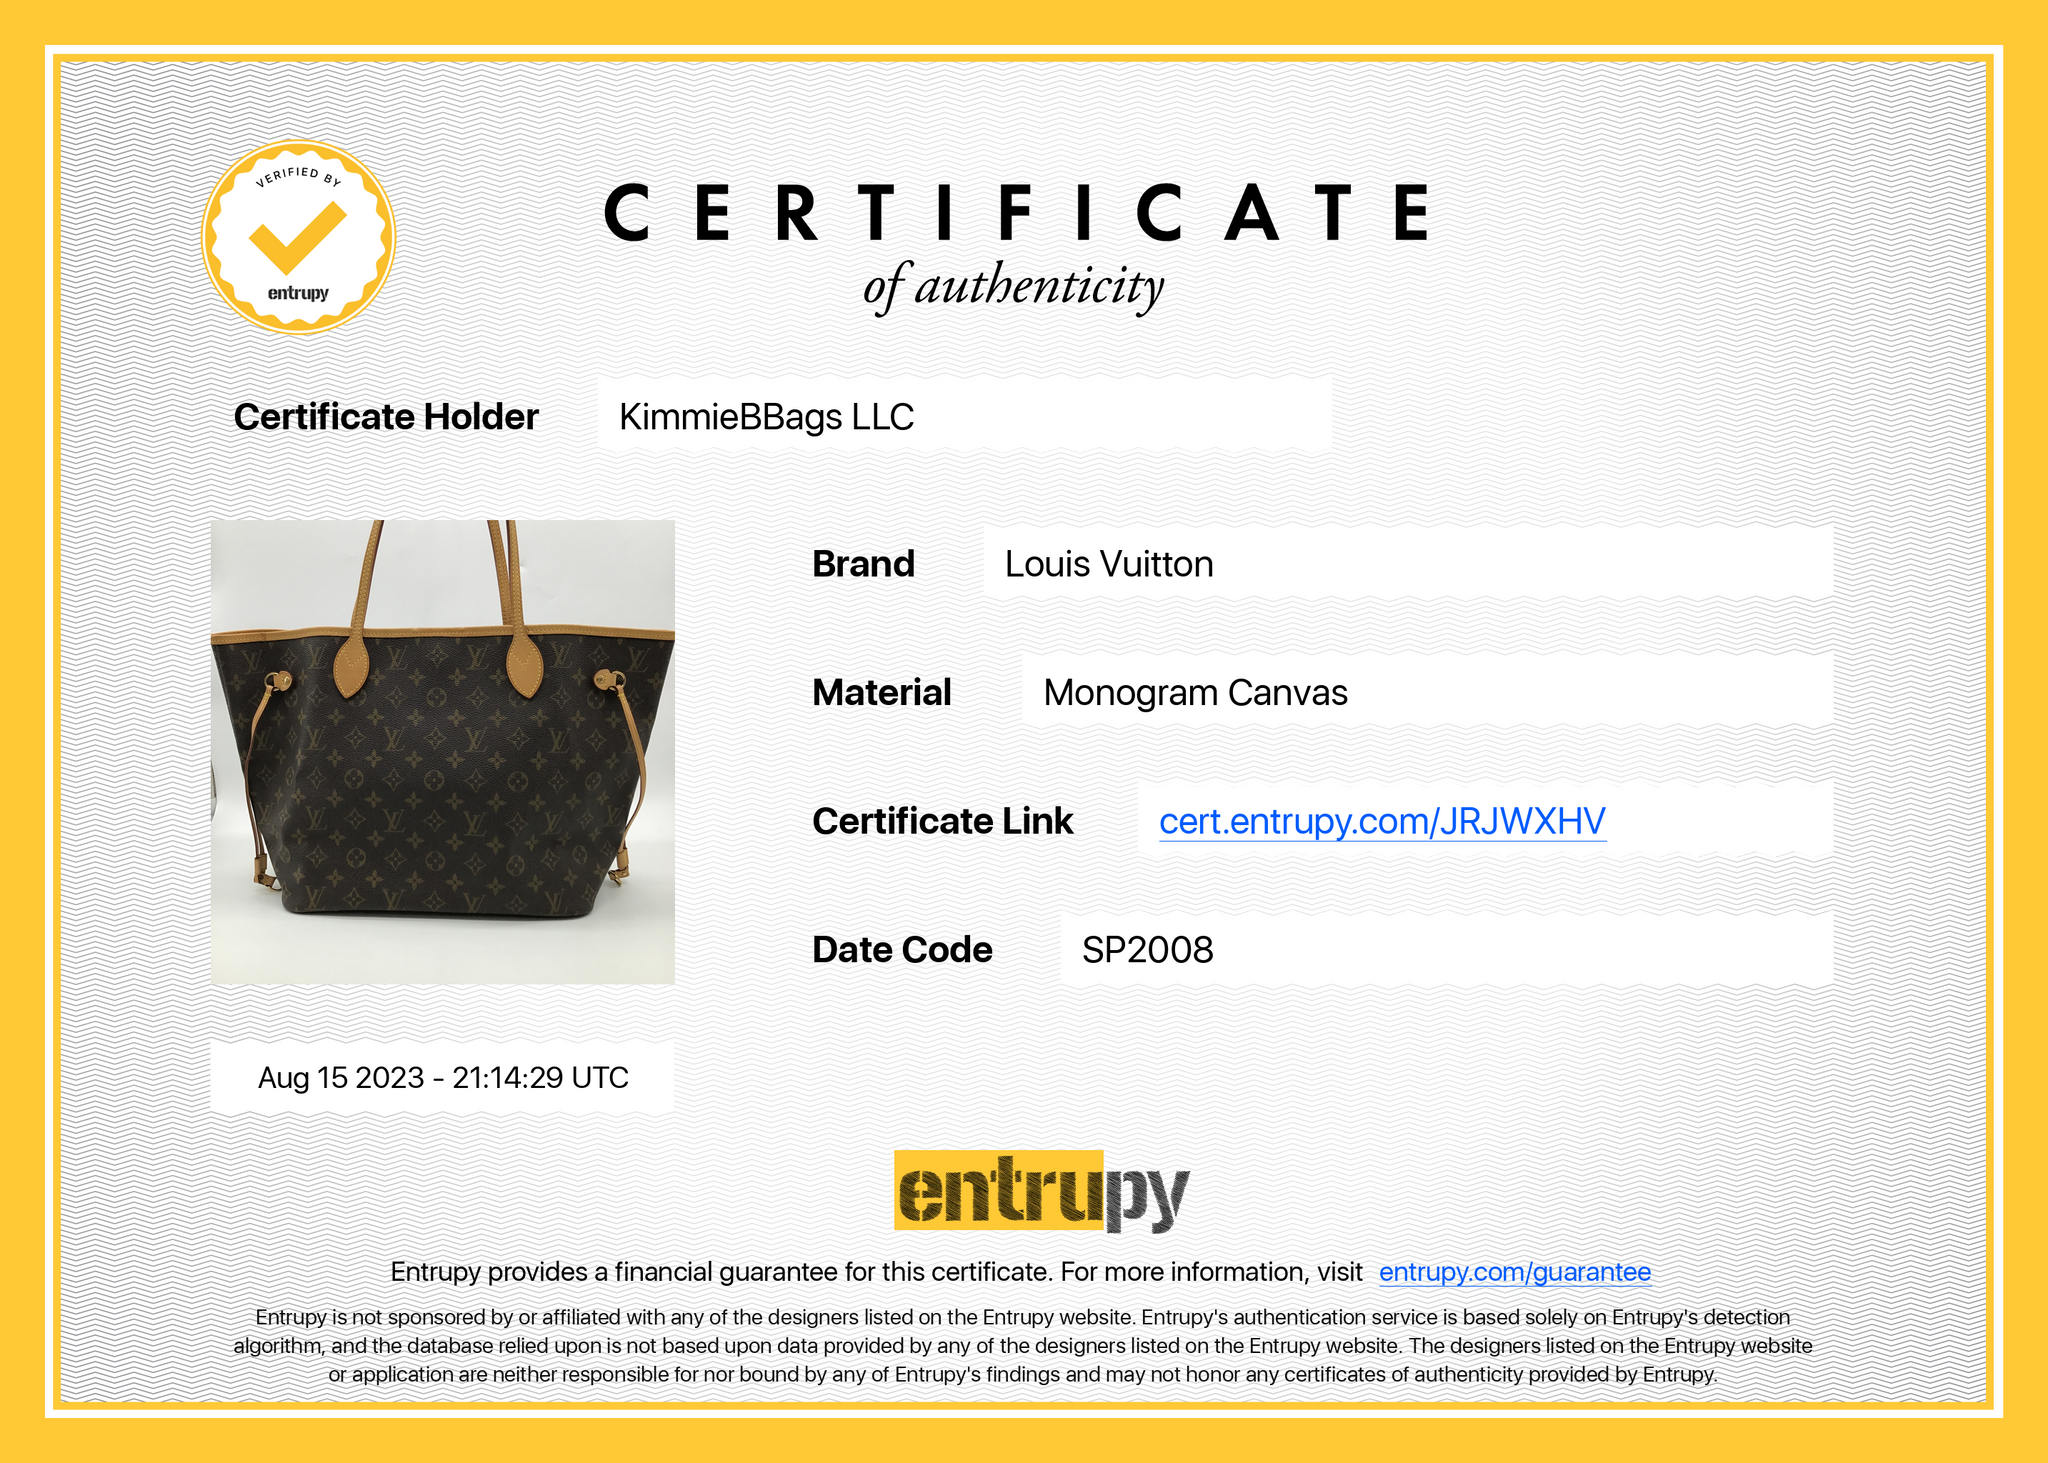 LOUIS VUITTON - NEVERFULL MM TOTE IN MONOGRAM WITH BEIGE INTERIOR